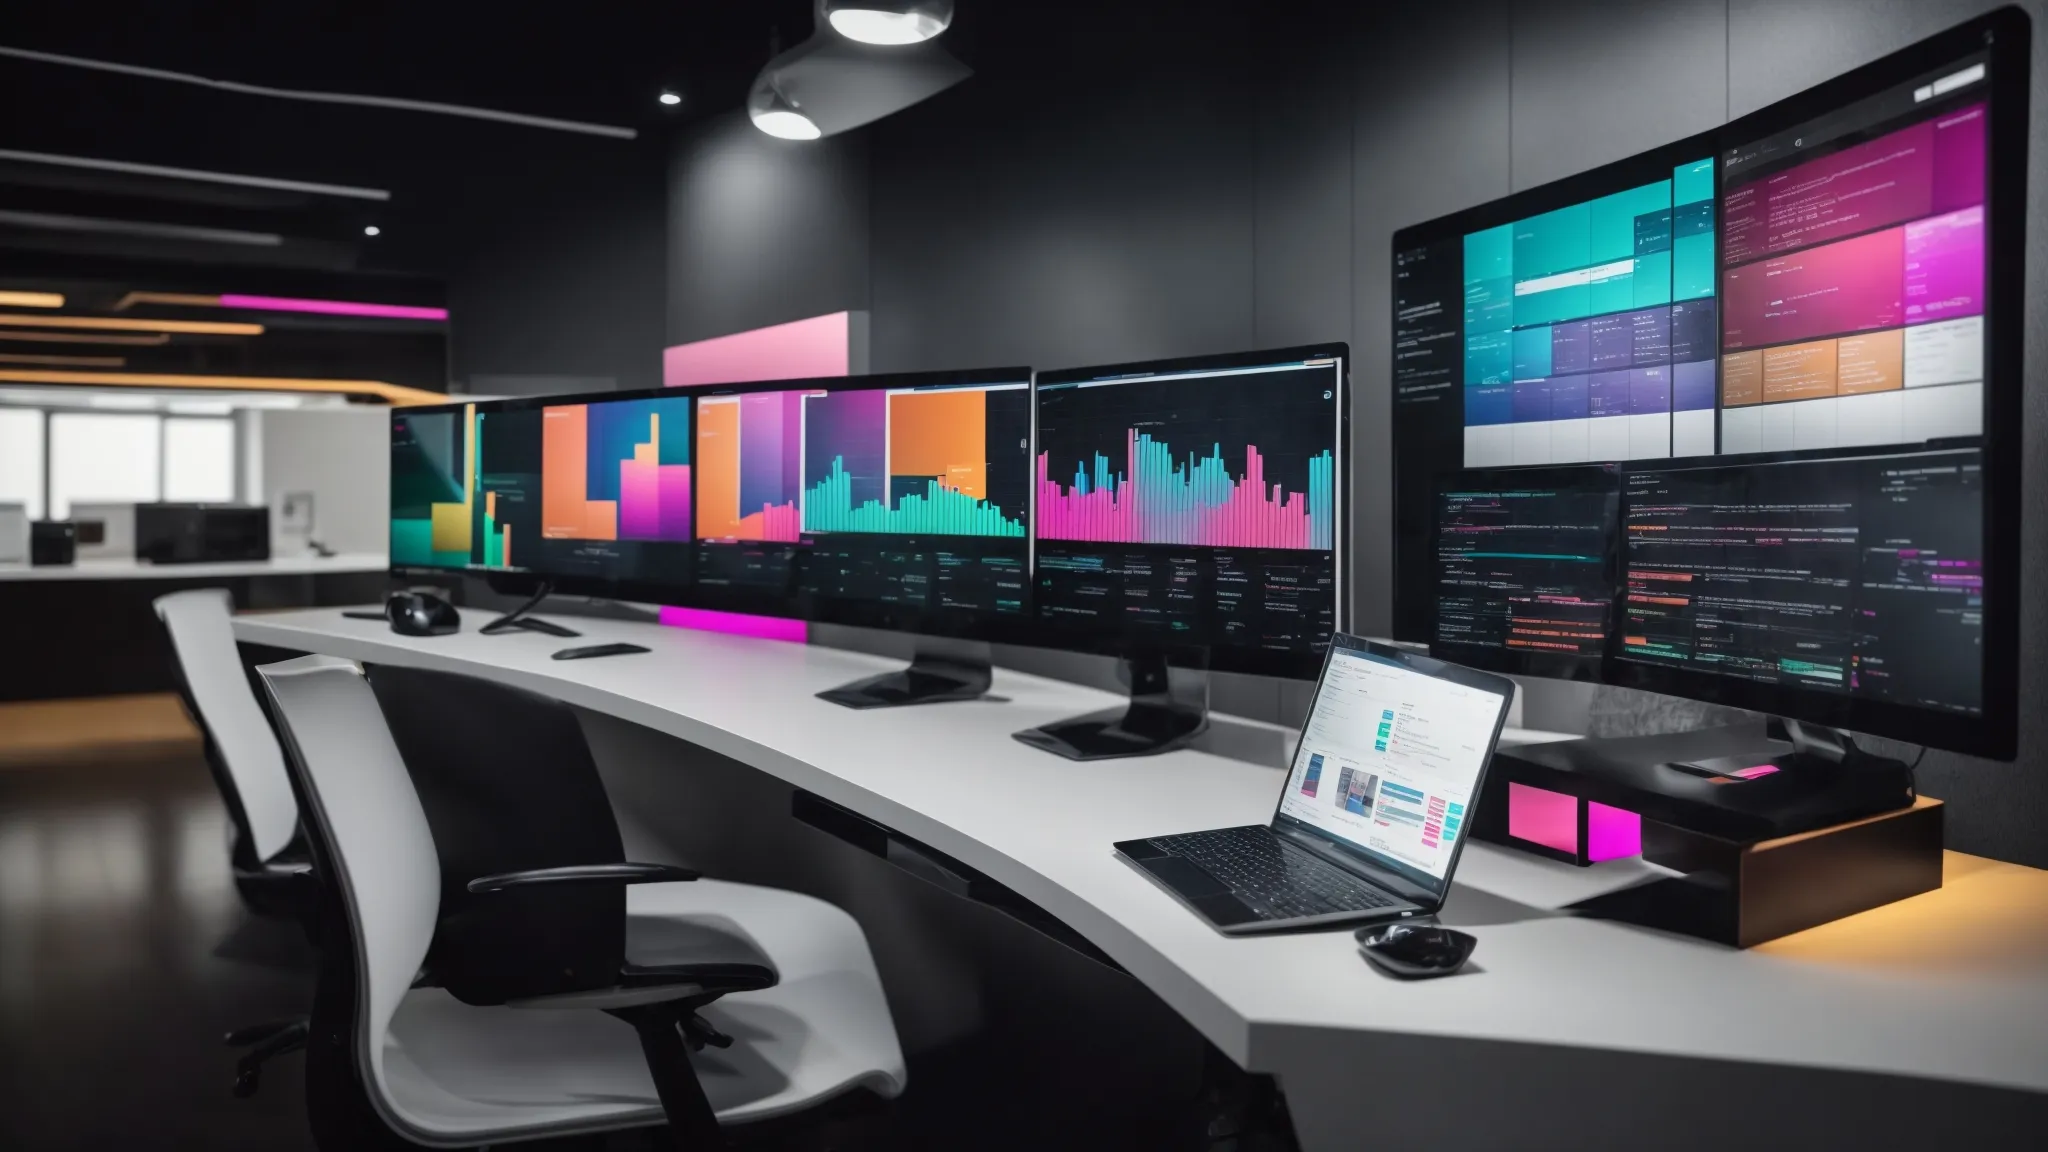 a sleek, modern office setup with multiple computer screens displaying colorful graphs and email templates, symbolizing an advanced ai-driven email campaign management system.